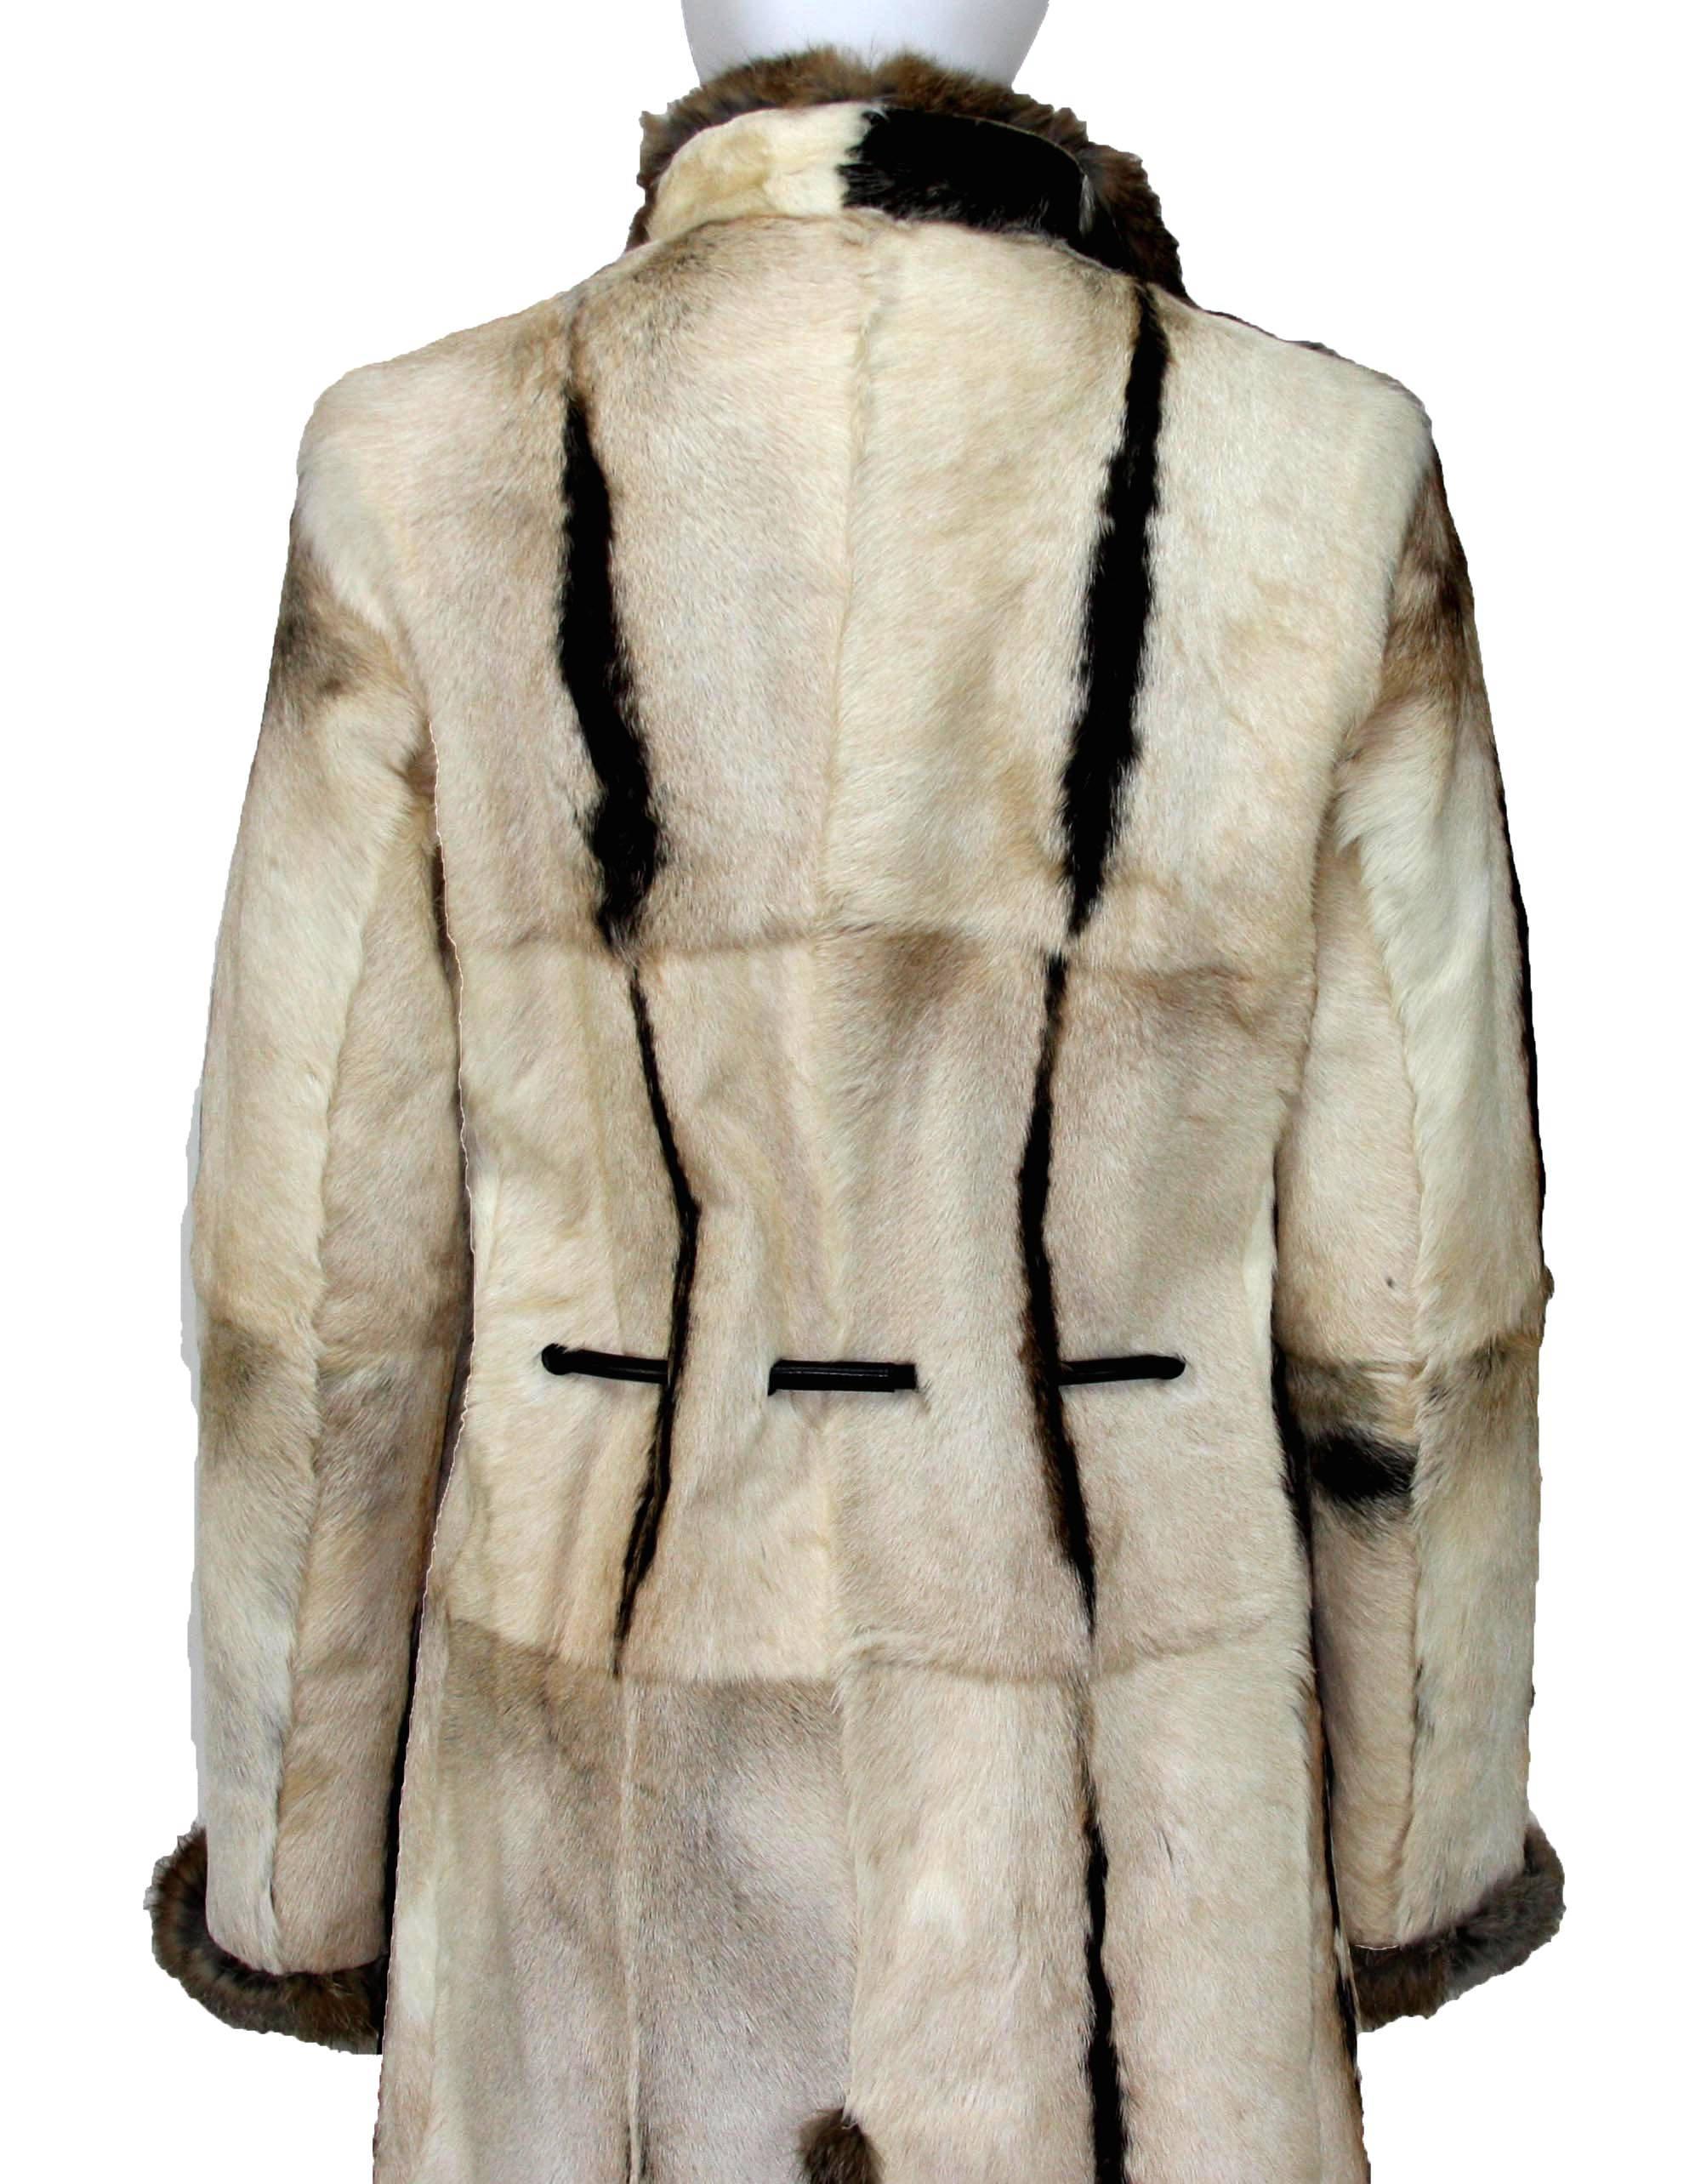 Tom Ford for Gucci Reversible Beige Fur Coat It.40 2